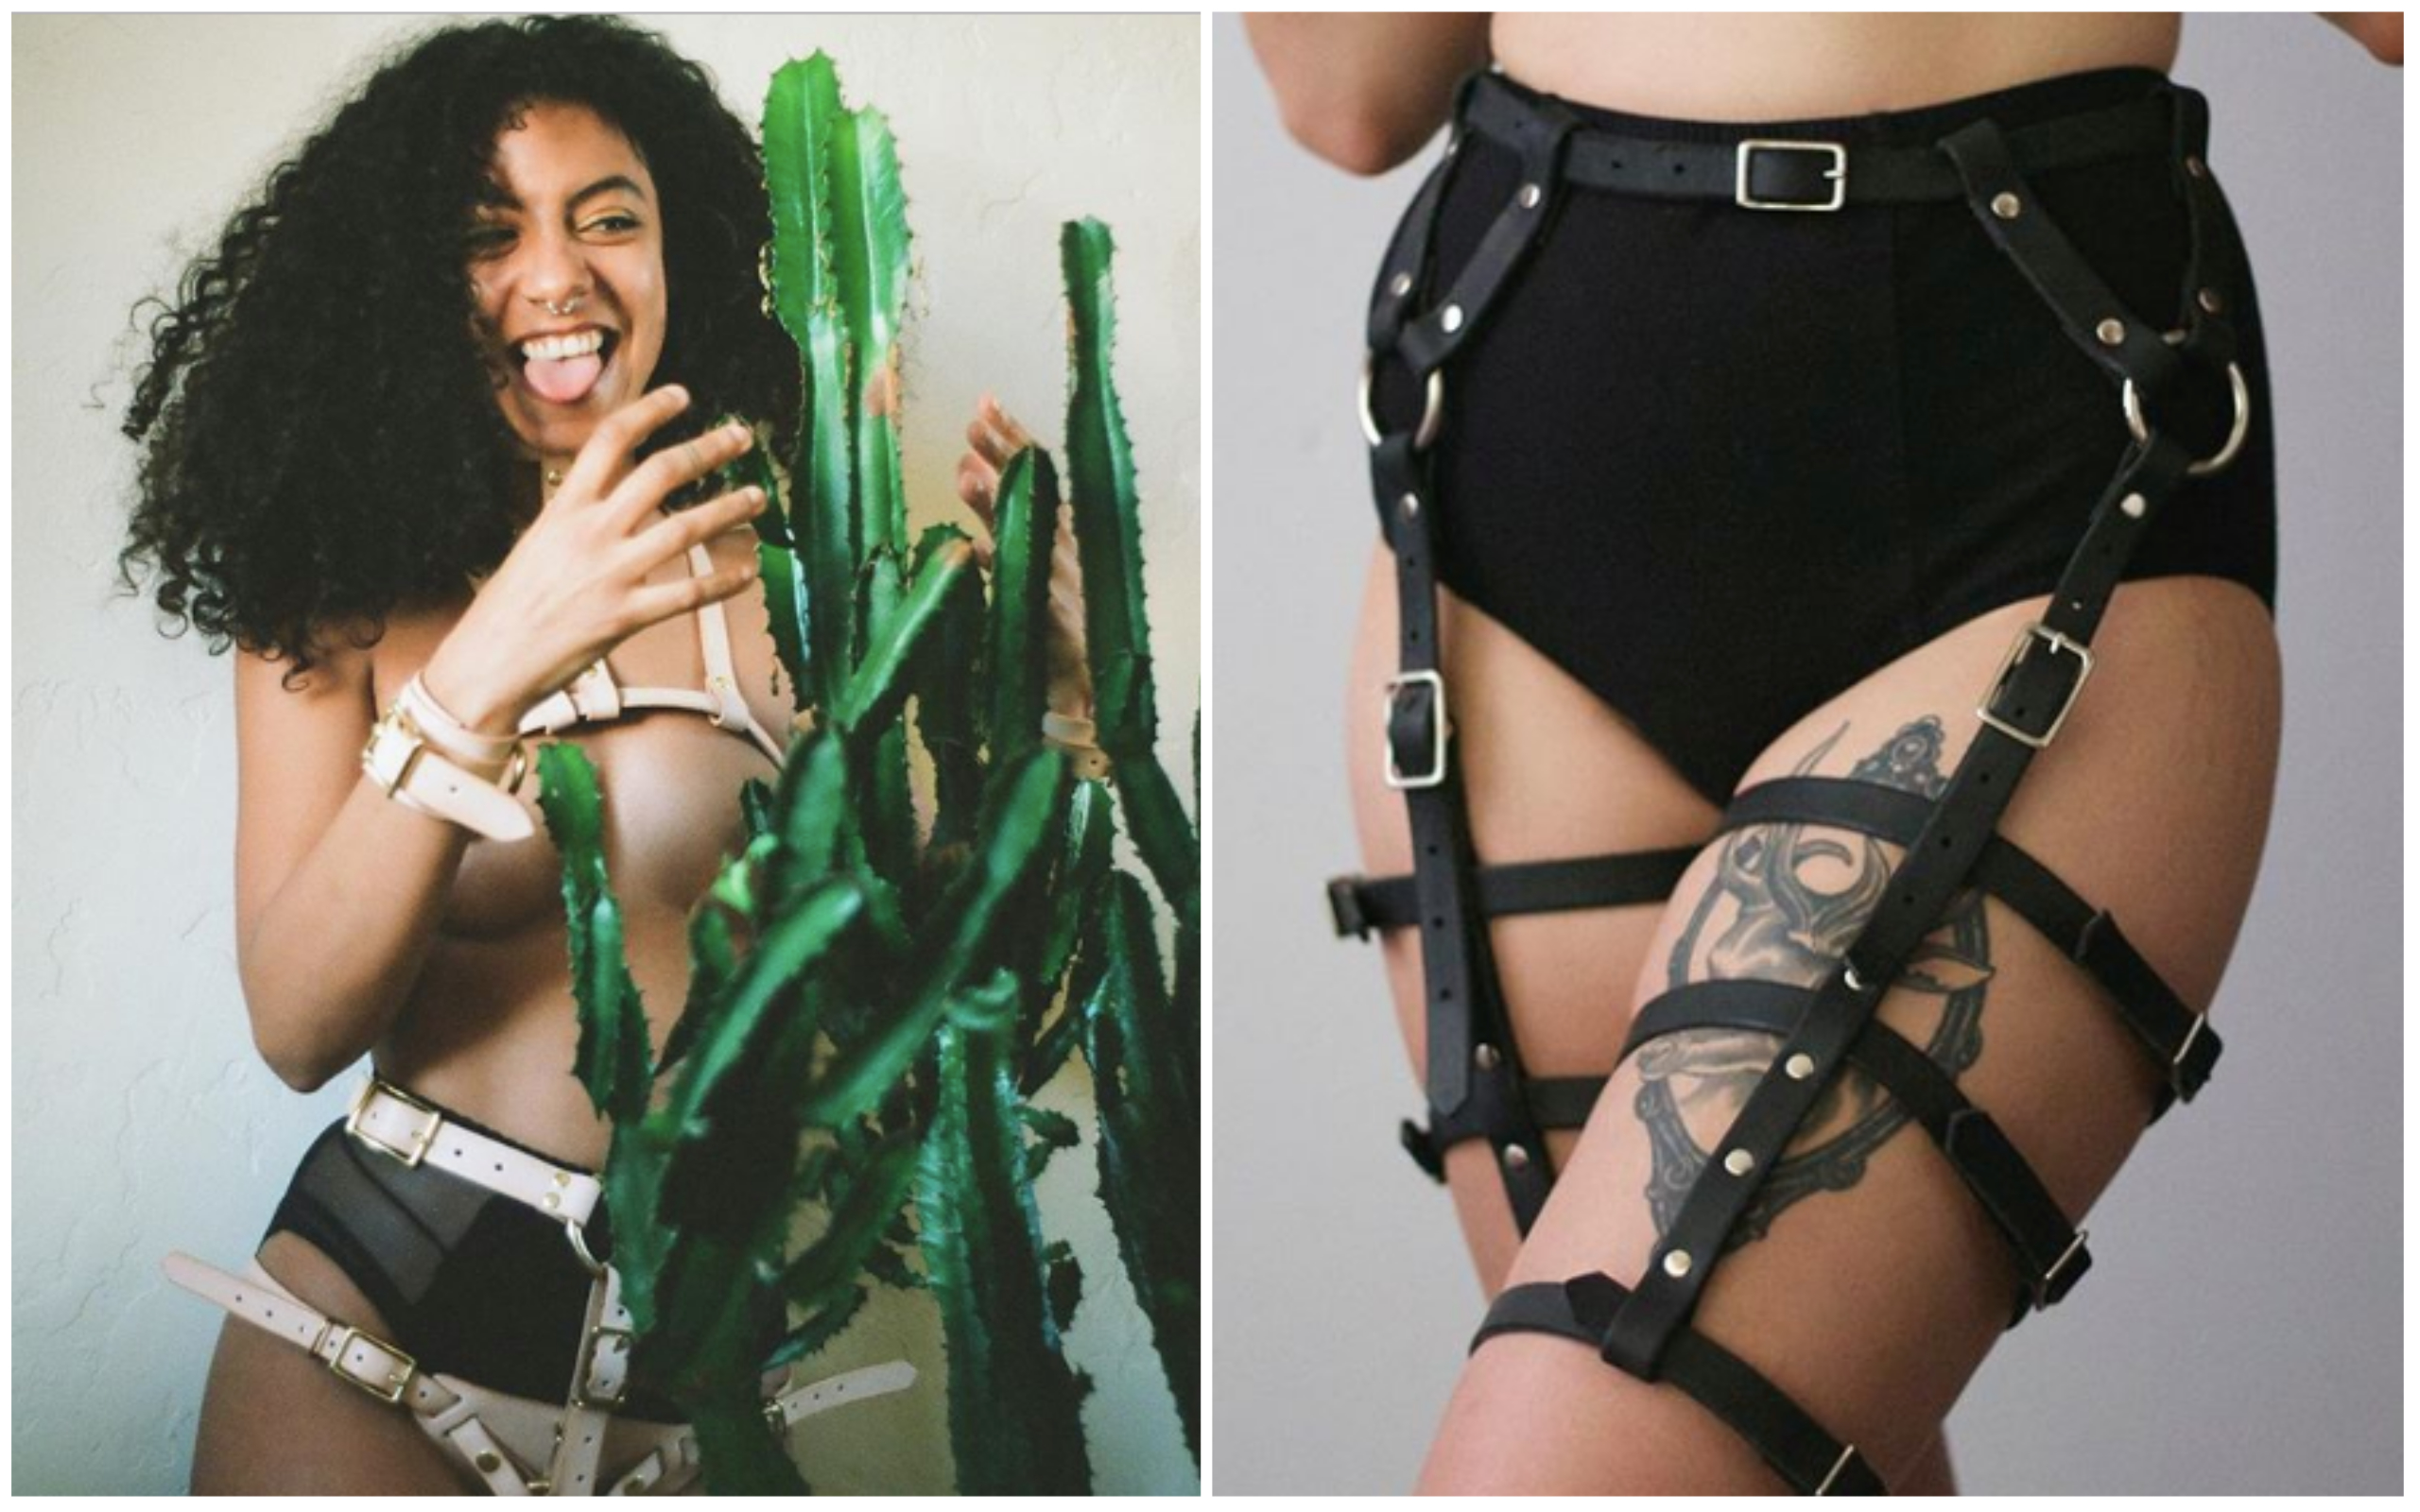 Chicago Black Strapon - Strap-Ons Are Art for This Femme-Friendly DIY Leather ...